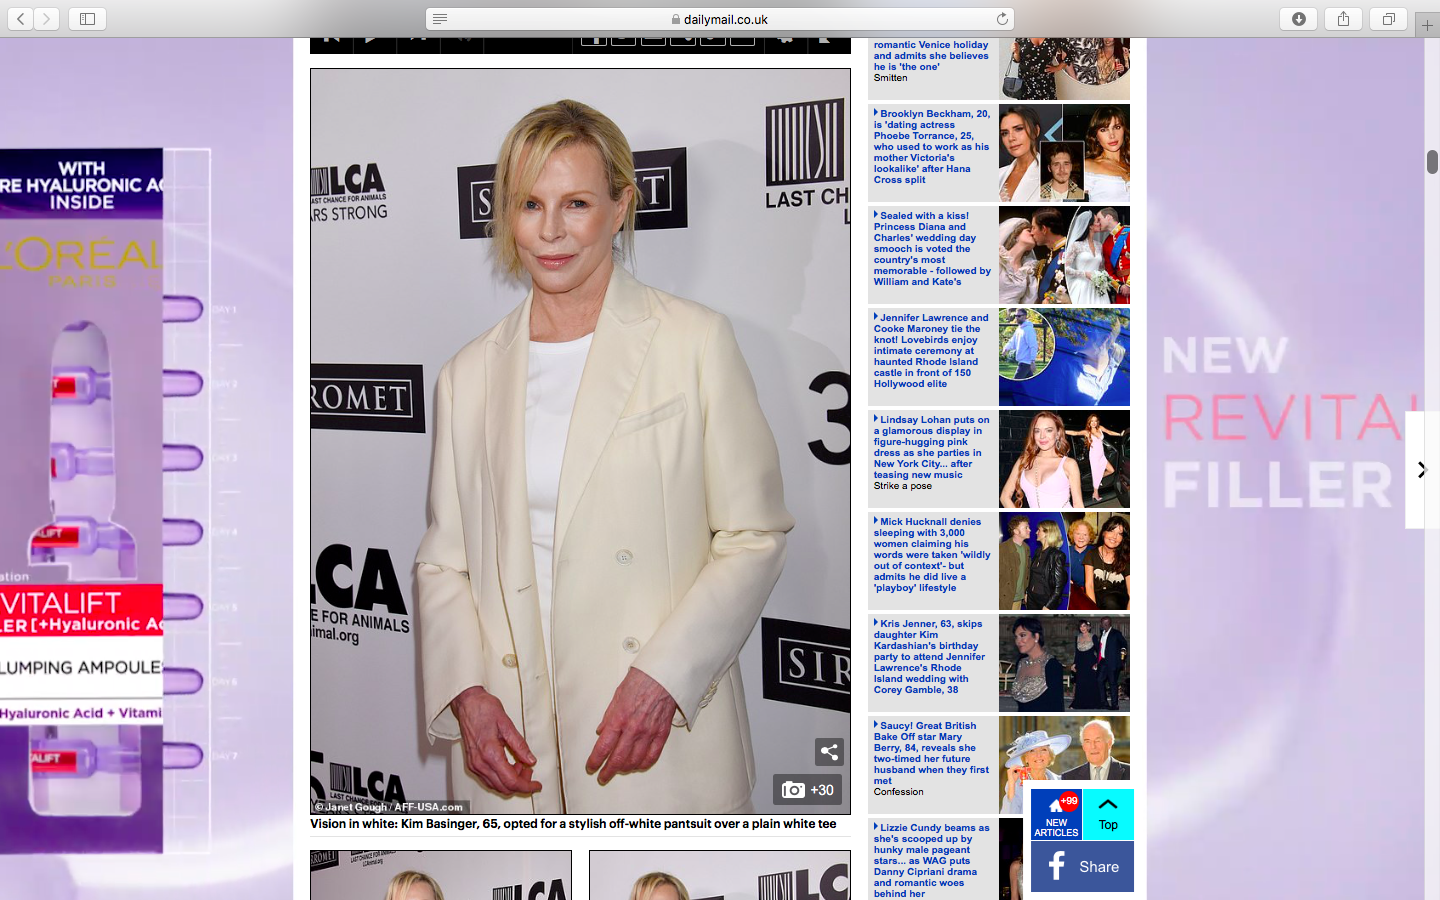 Super star Hollywood actress and original Bond girl – Kim Basinger wearing my contour palette at last nights charity gala.